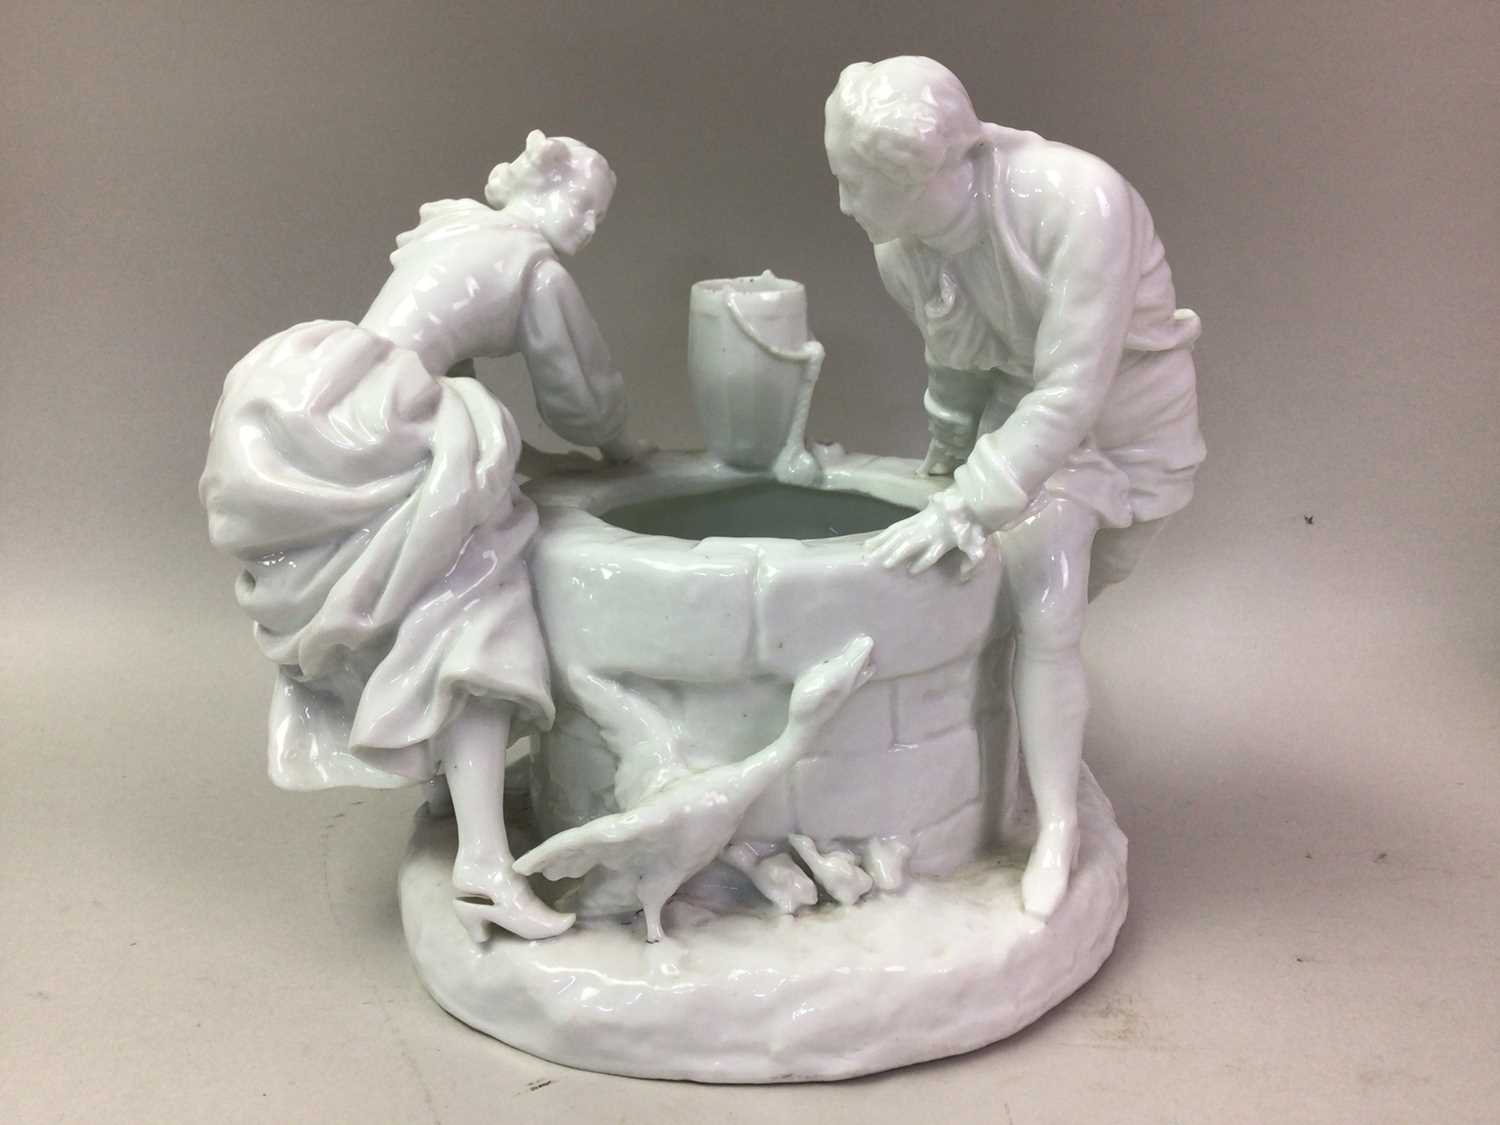 CONTINENTAL PORCELAIN FIGURAL GROUP OF A YOUNG MAN AND WOMAN, ALONG WITH FURTHER PORCELAIN - Image 2 of 3